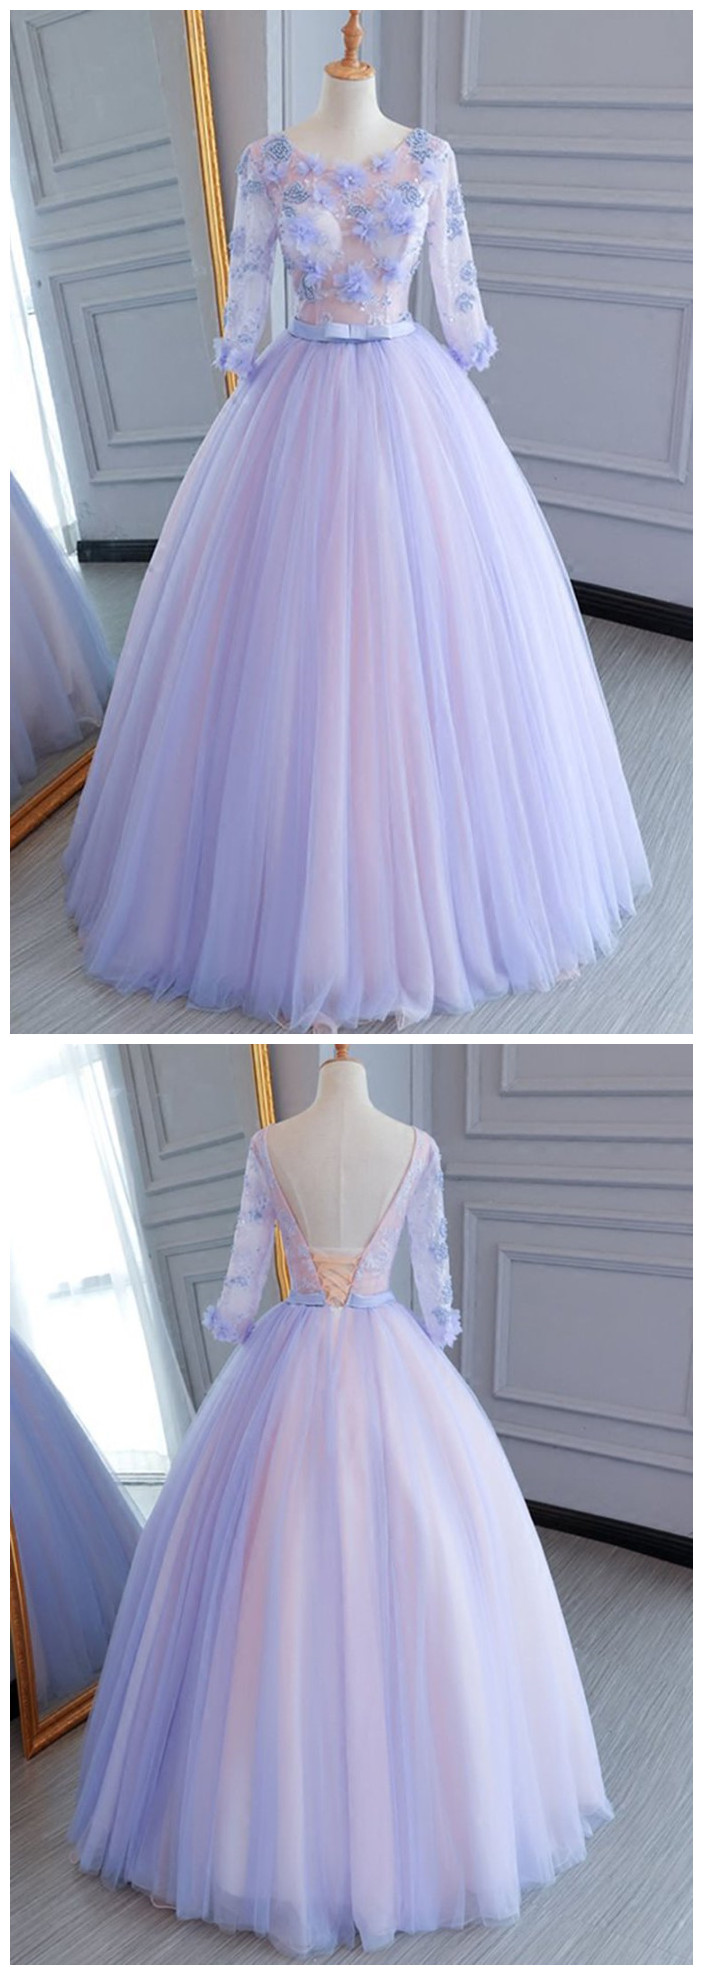 Unique Lavender Tulle ,mid Sleeve, Long A-line, Lace Appliqué Prom Dress, Evening Dress,floor Length Prom Gowns ,sexy Formal Evening